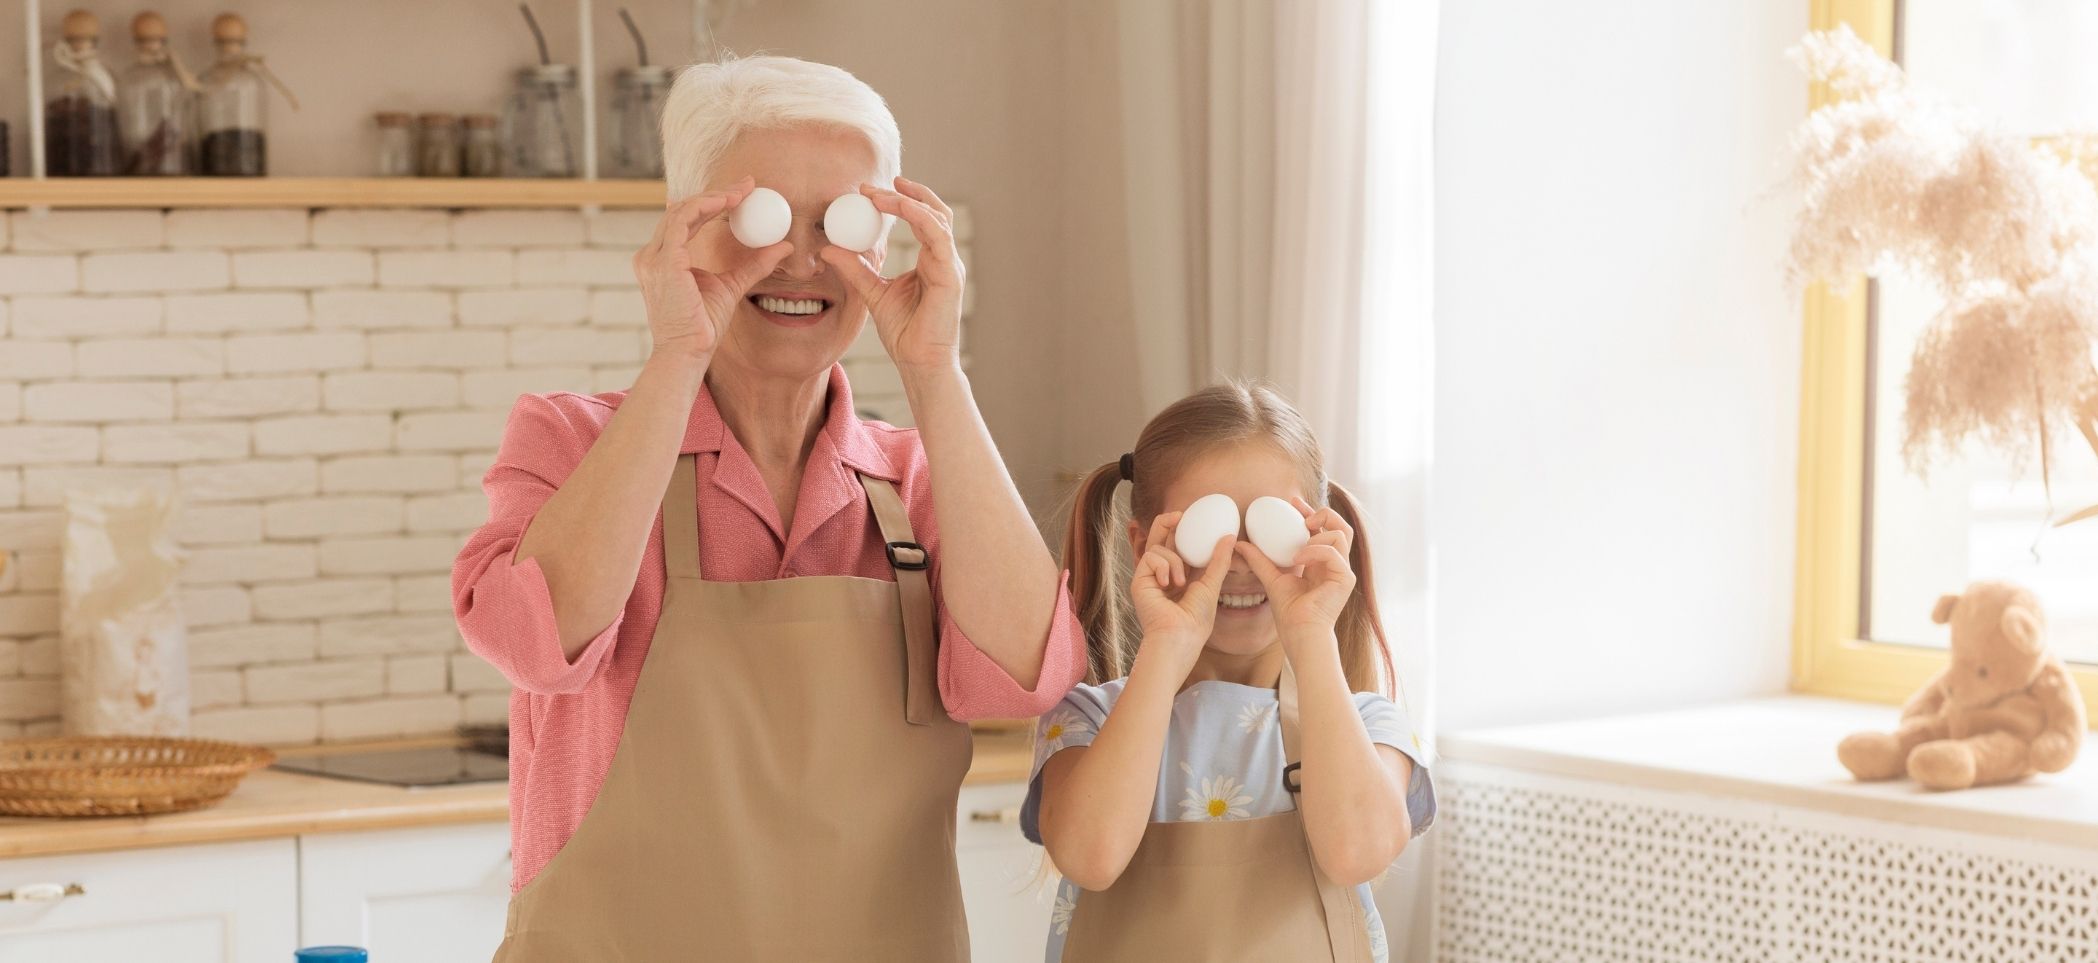 an older woman an a young girl stand in a kitchen holding eggs in front of their eyes